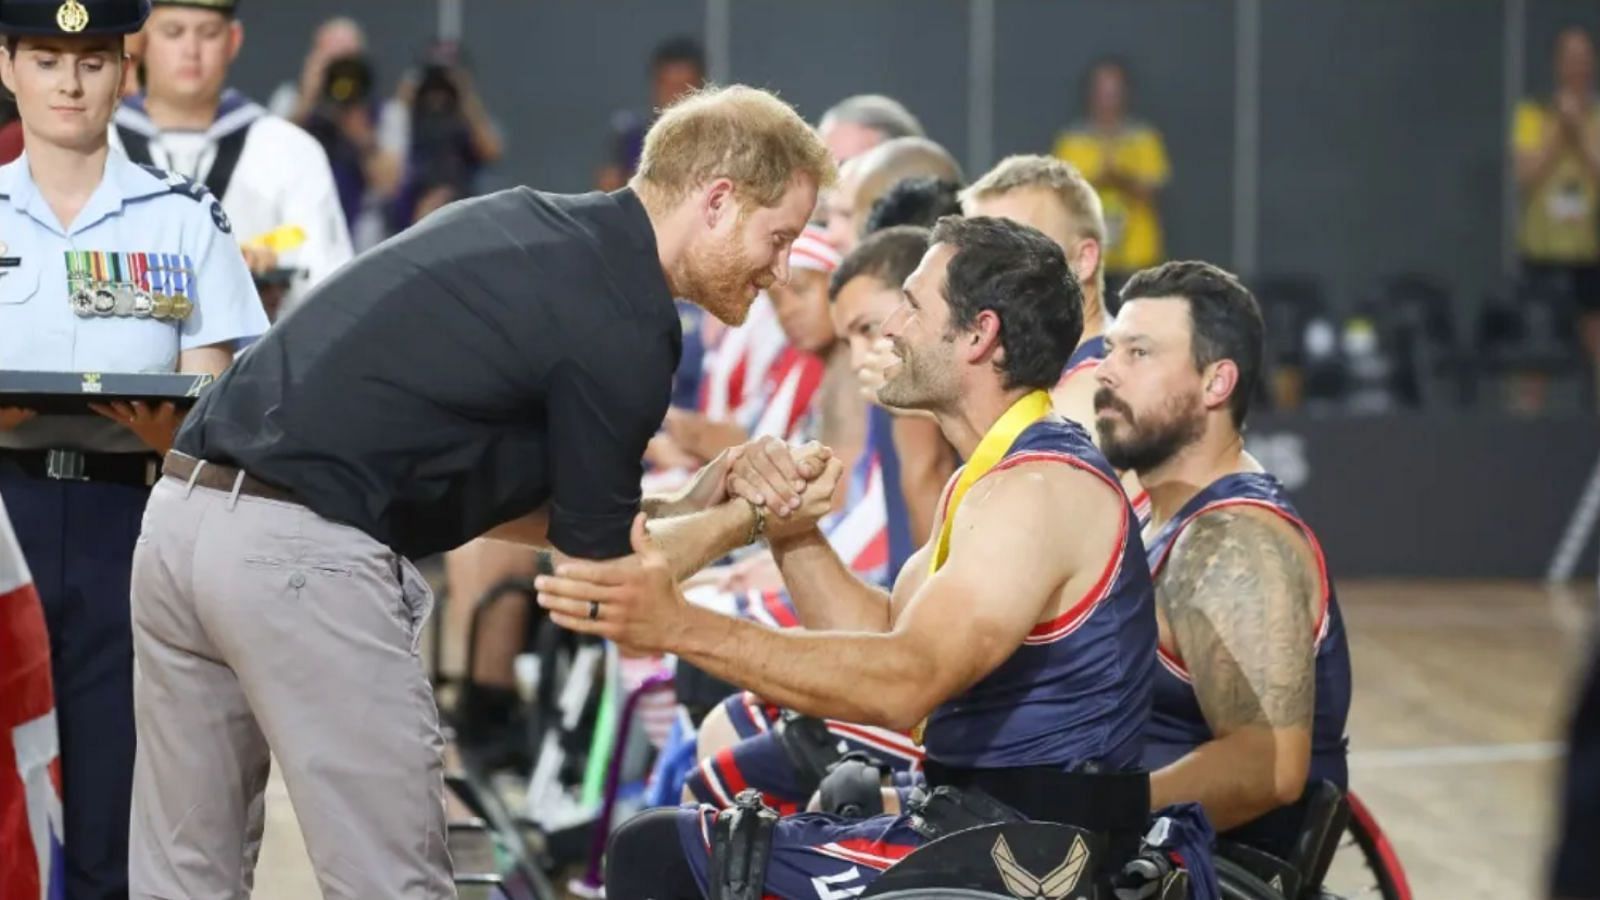 Prince Harry at the Invictus Games (Image via Getty)